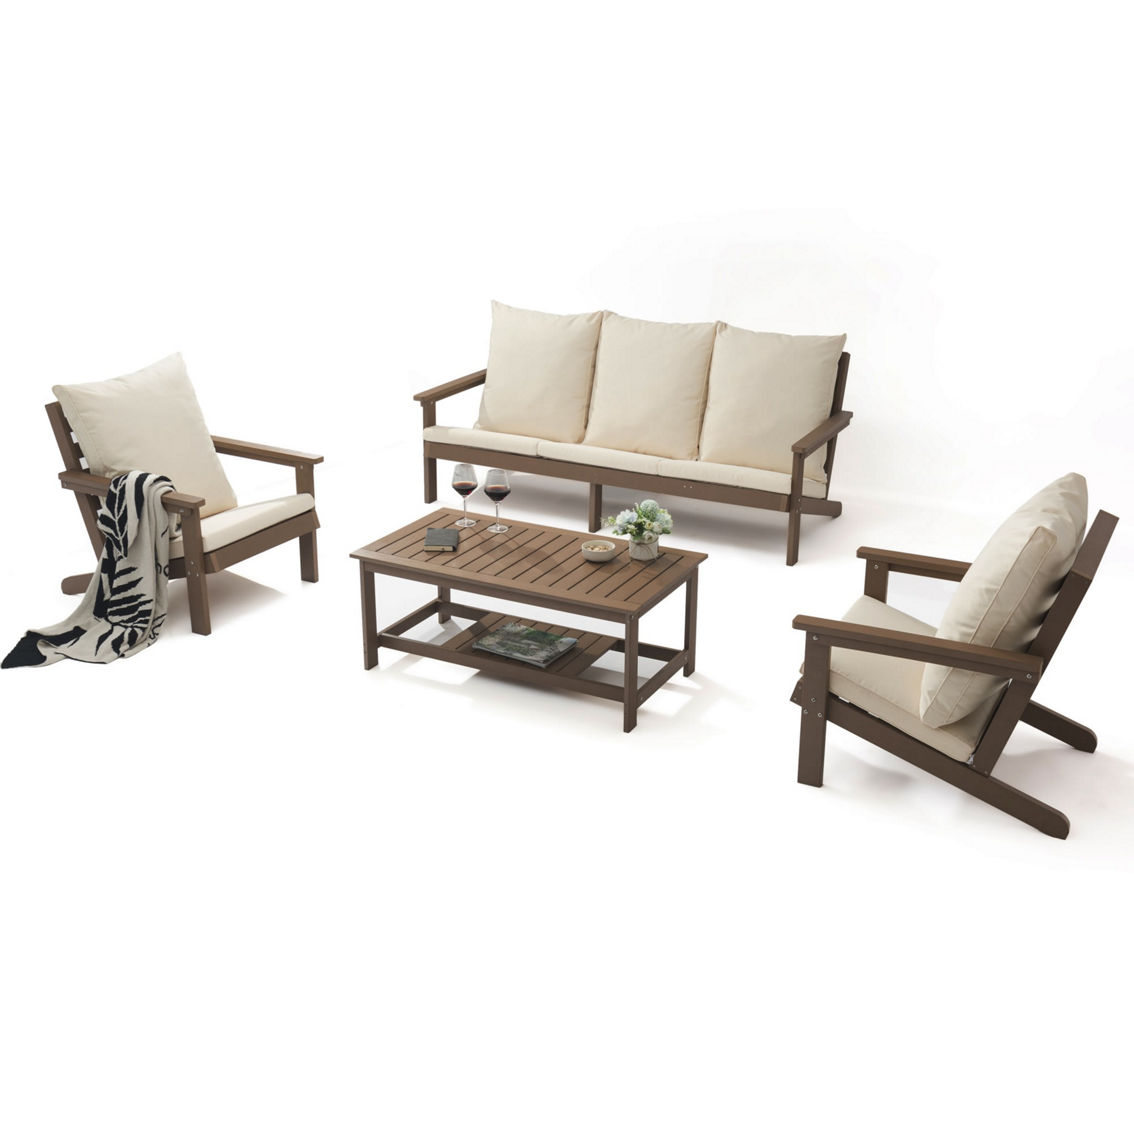 Inspired Home Hanan Outdoor 4pc Seating Group - Image 3 of 5